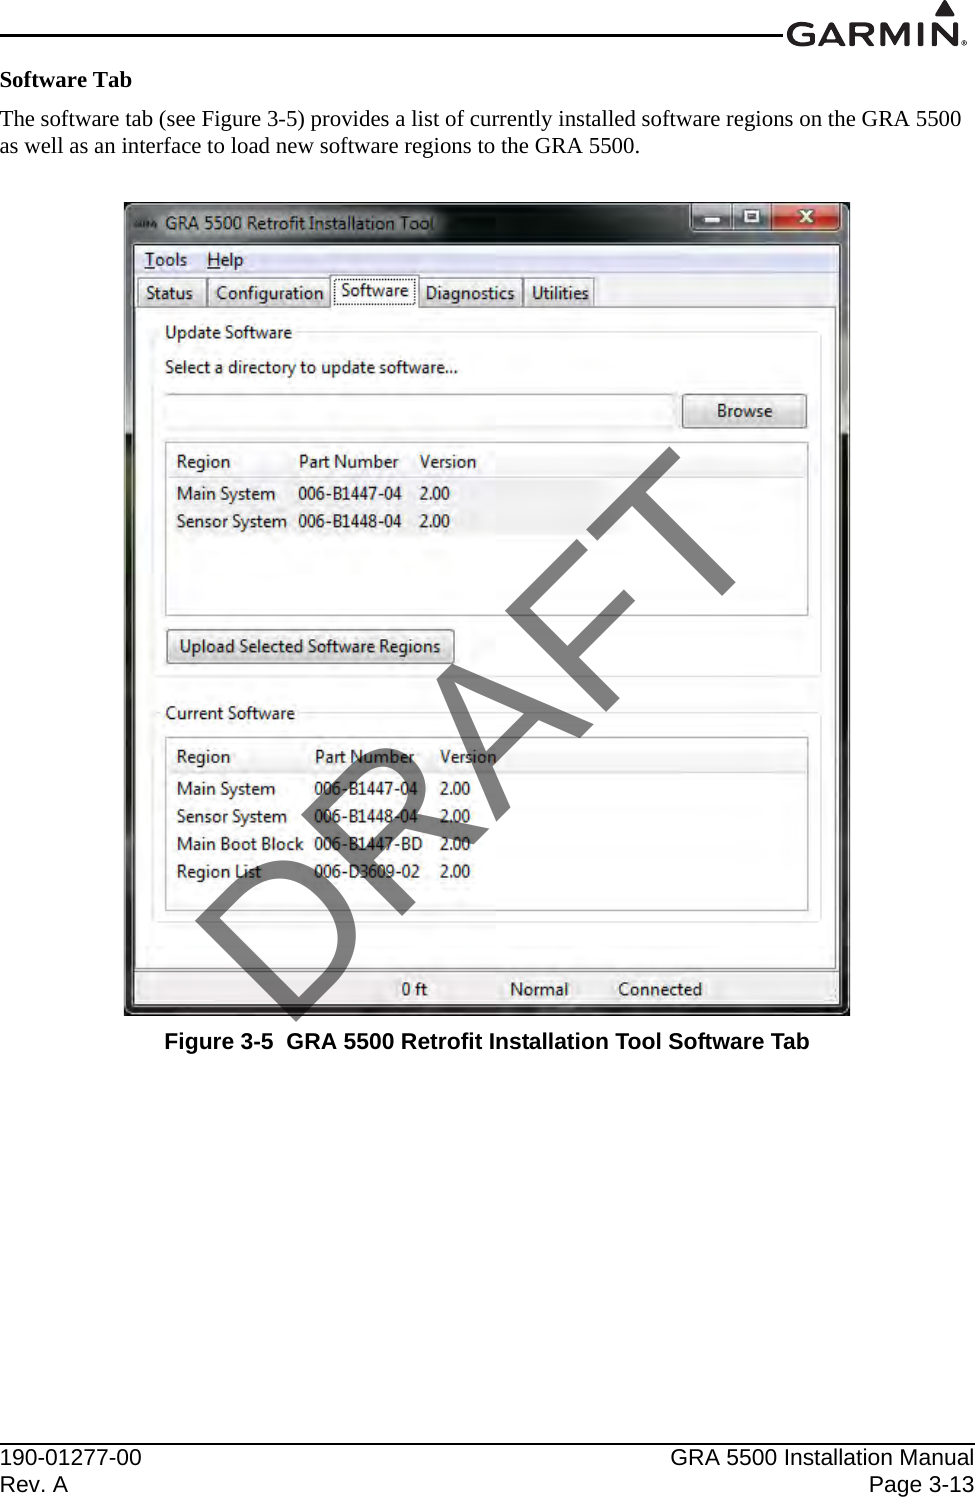 190-01277-00 GRA 5500 Installation ManualRev. A Page 3-13Software TabThe software tab (see Figure 3-5) provides a list of currently installed software regions on the GRA 5500 as well as an interface to load new software regions to the GRA 5500.Figure 3-5  GRA 5500 Retrofit Installation Tool Software TabDRAFT